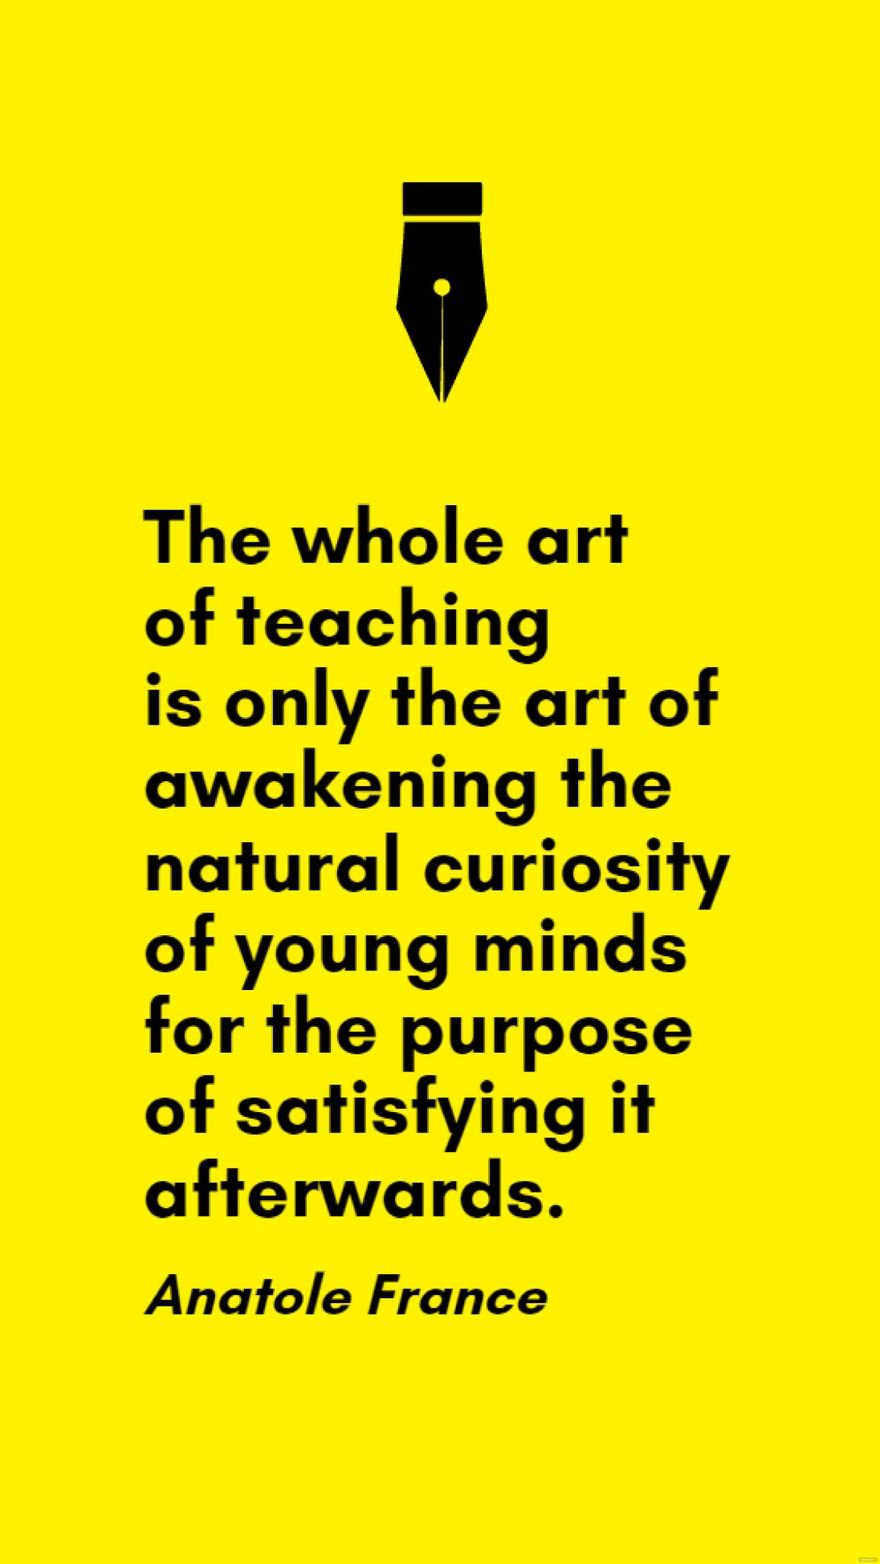 Anatole France - The whole art of teaching is only the art of awakening the natural curiosity of young minds for the purpose of satisfying it afterwards.